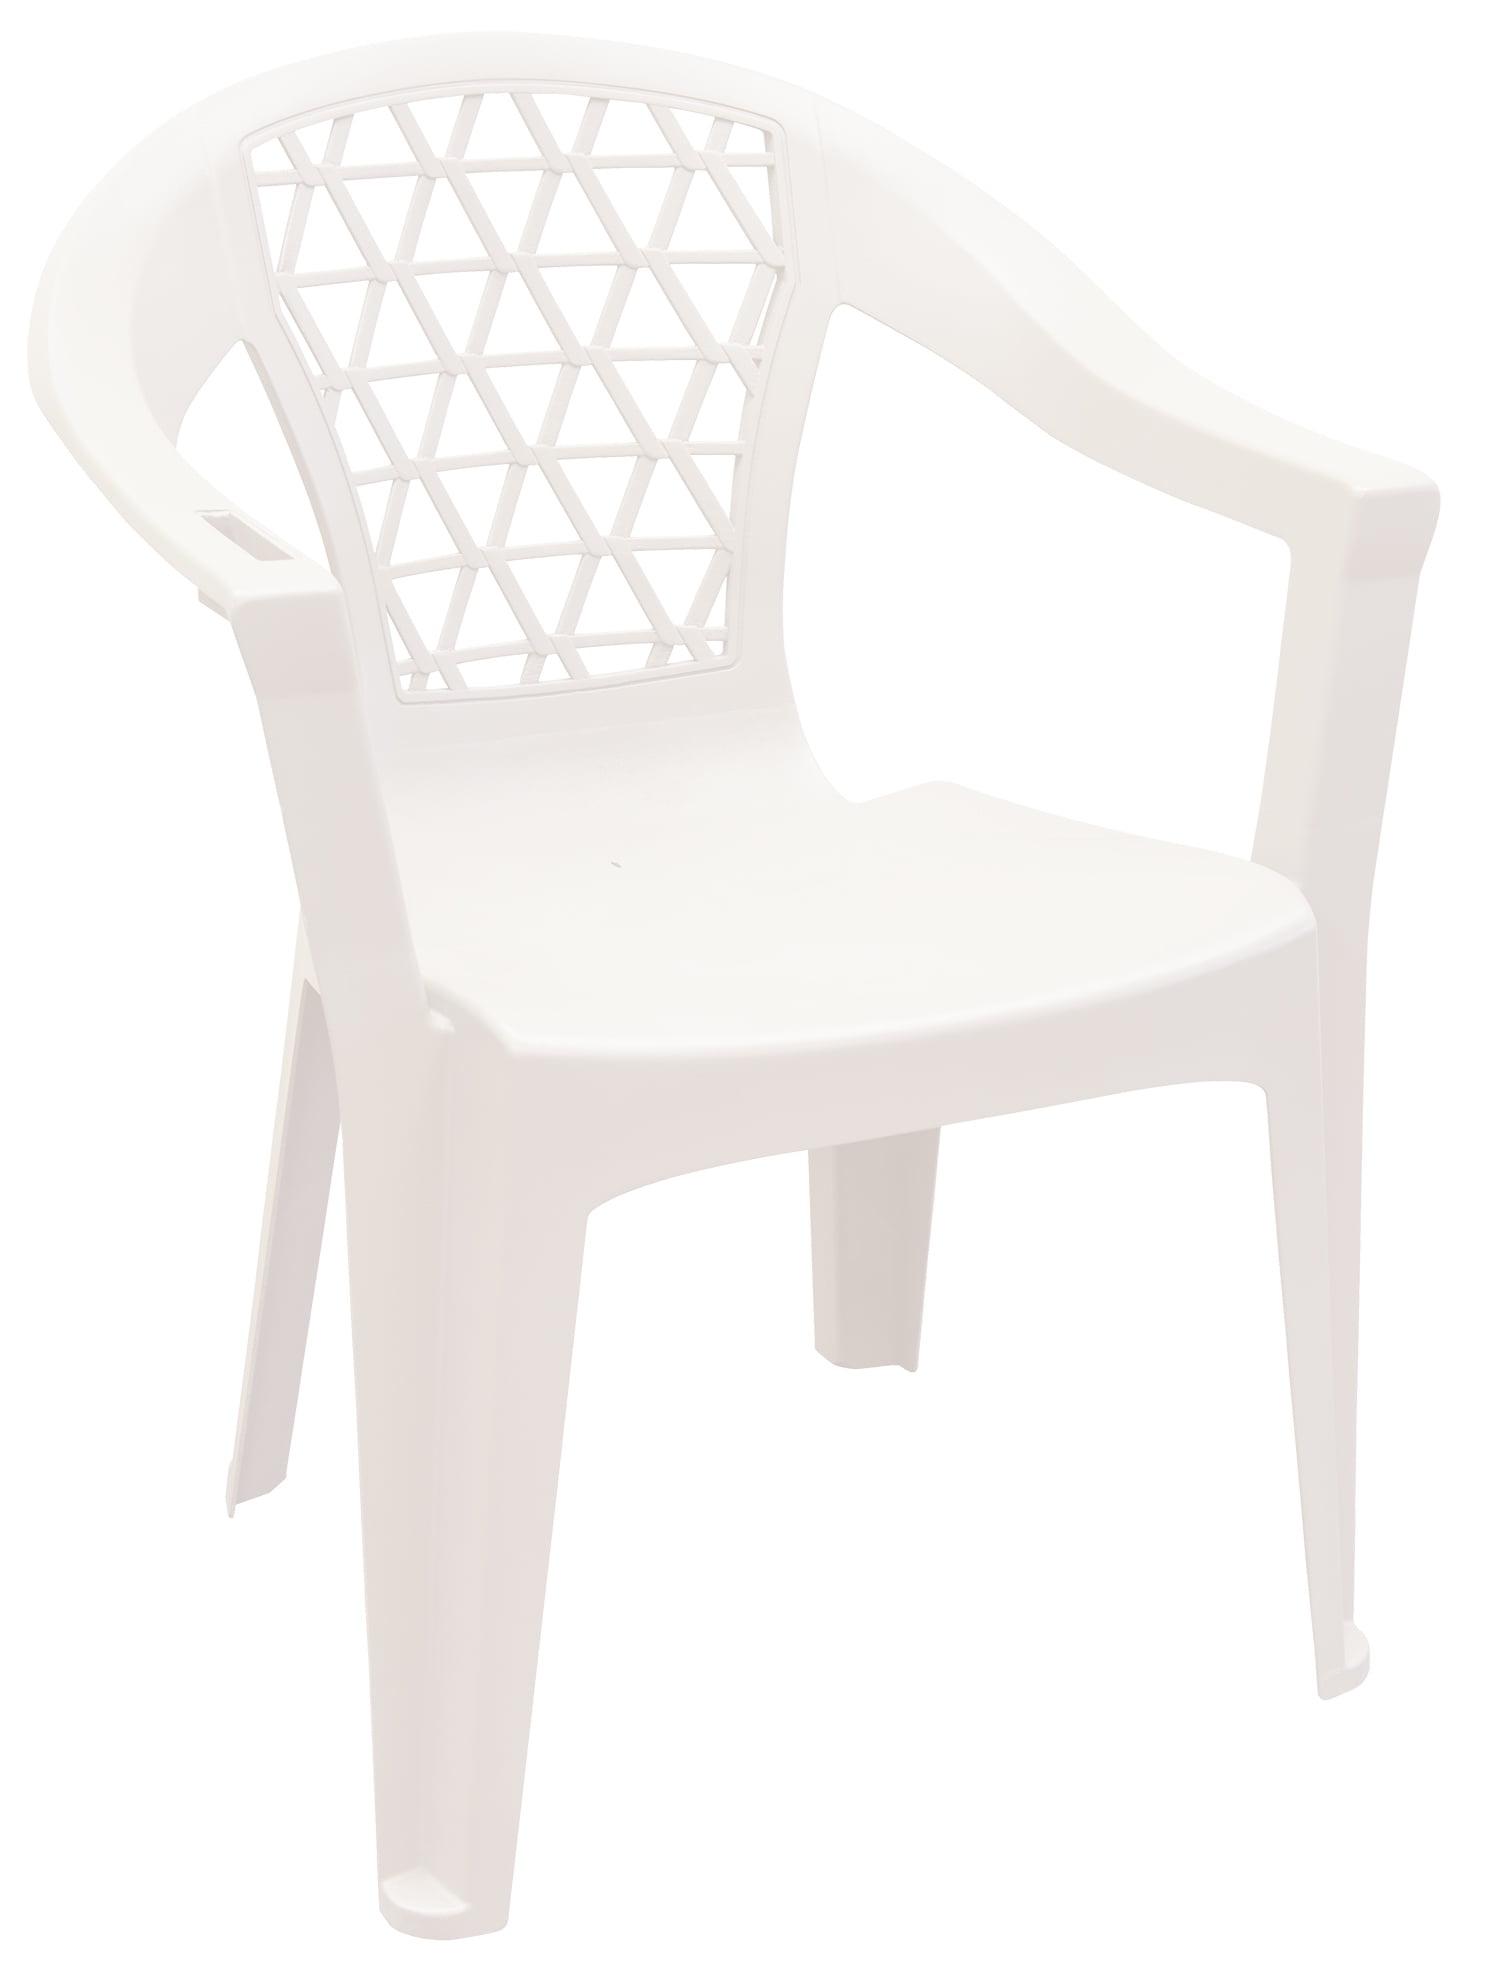 Adams Penza Outdoor Resin Stack Chair, White Resin Patio Chairs Stackable